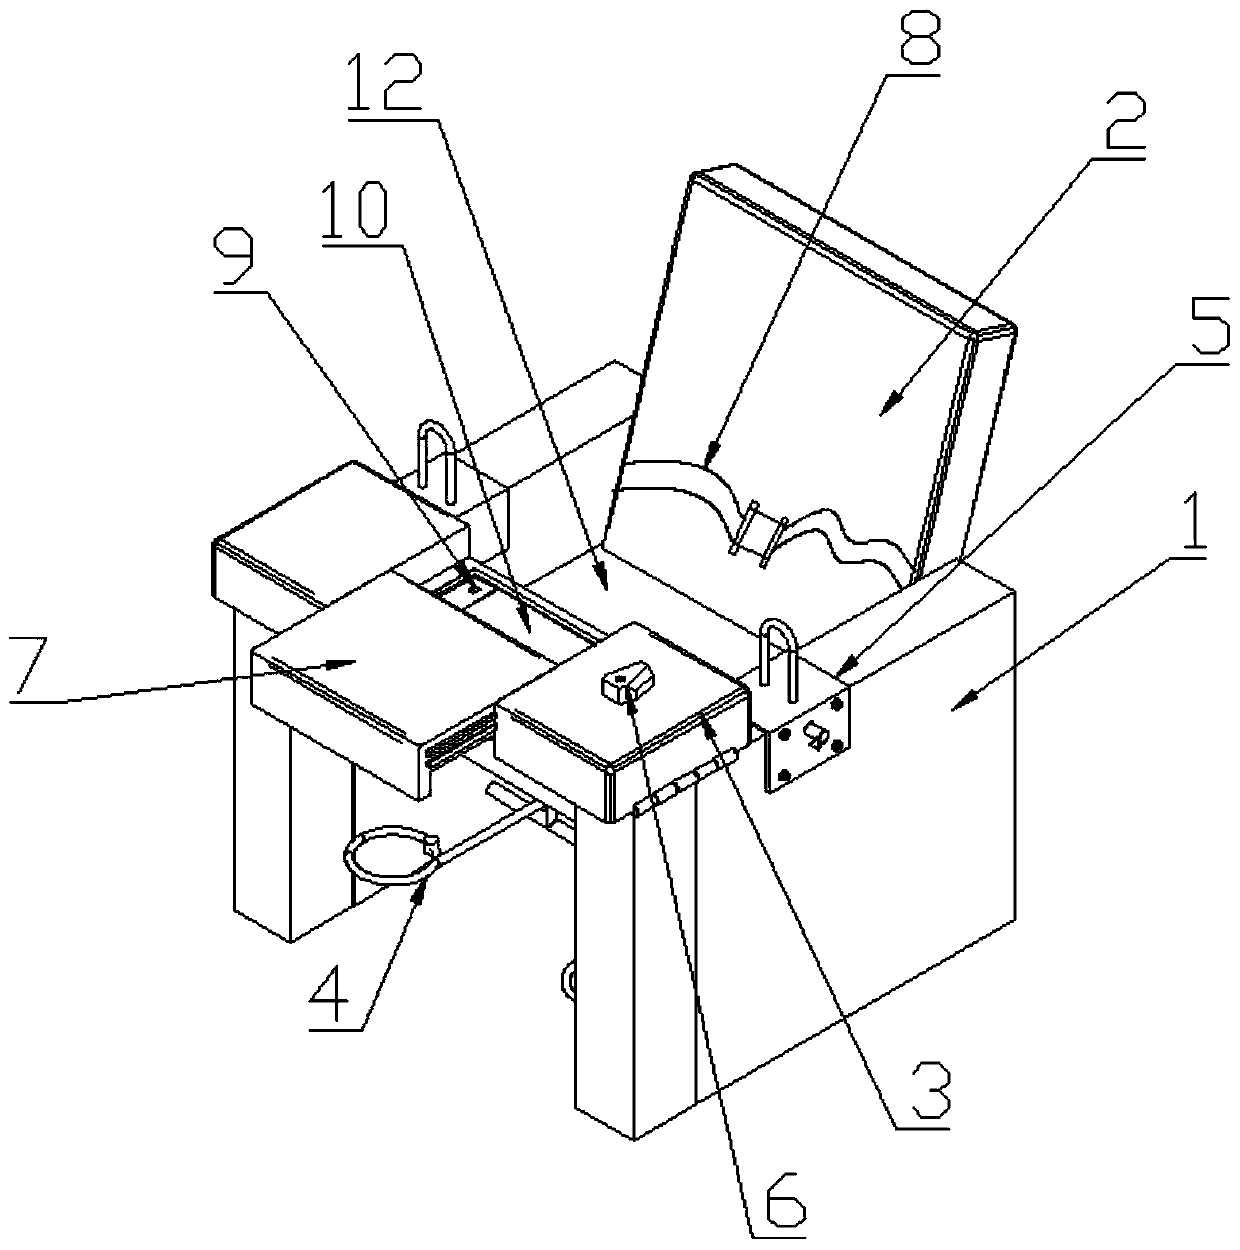 Interrogation chair for efficiently handling case